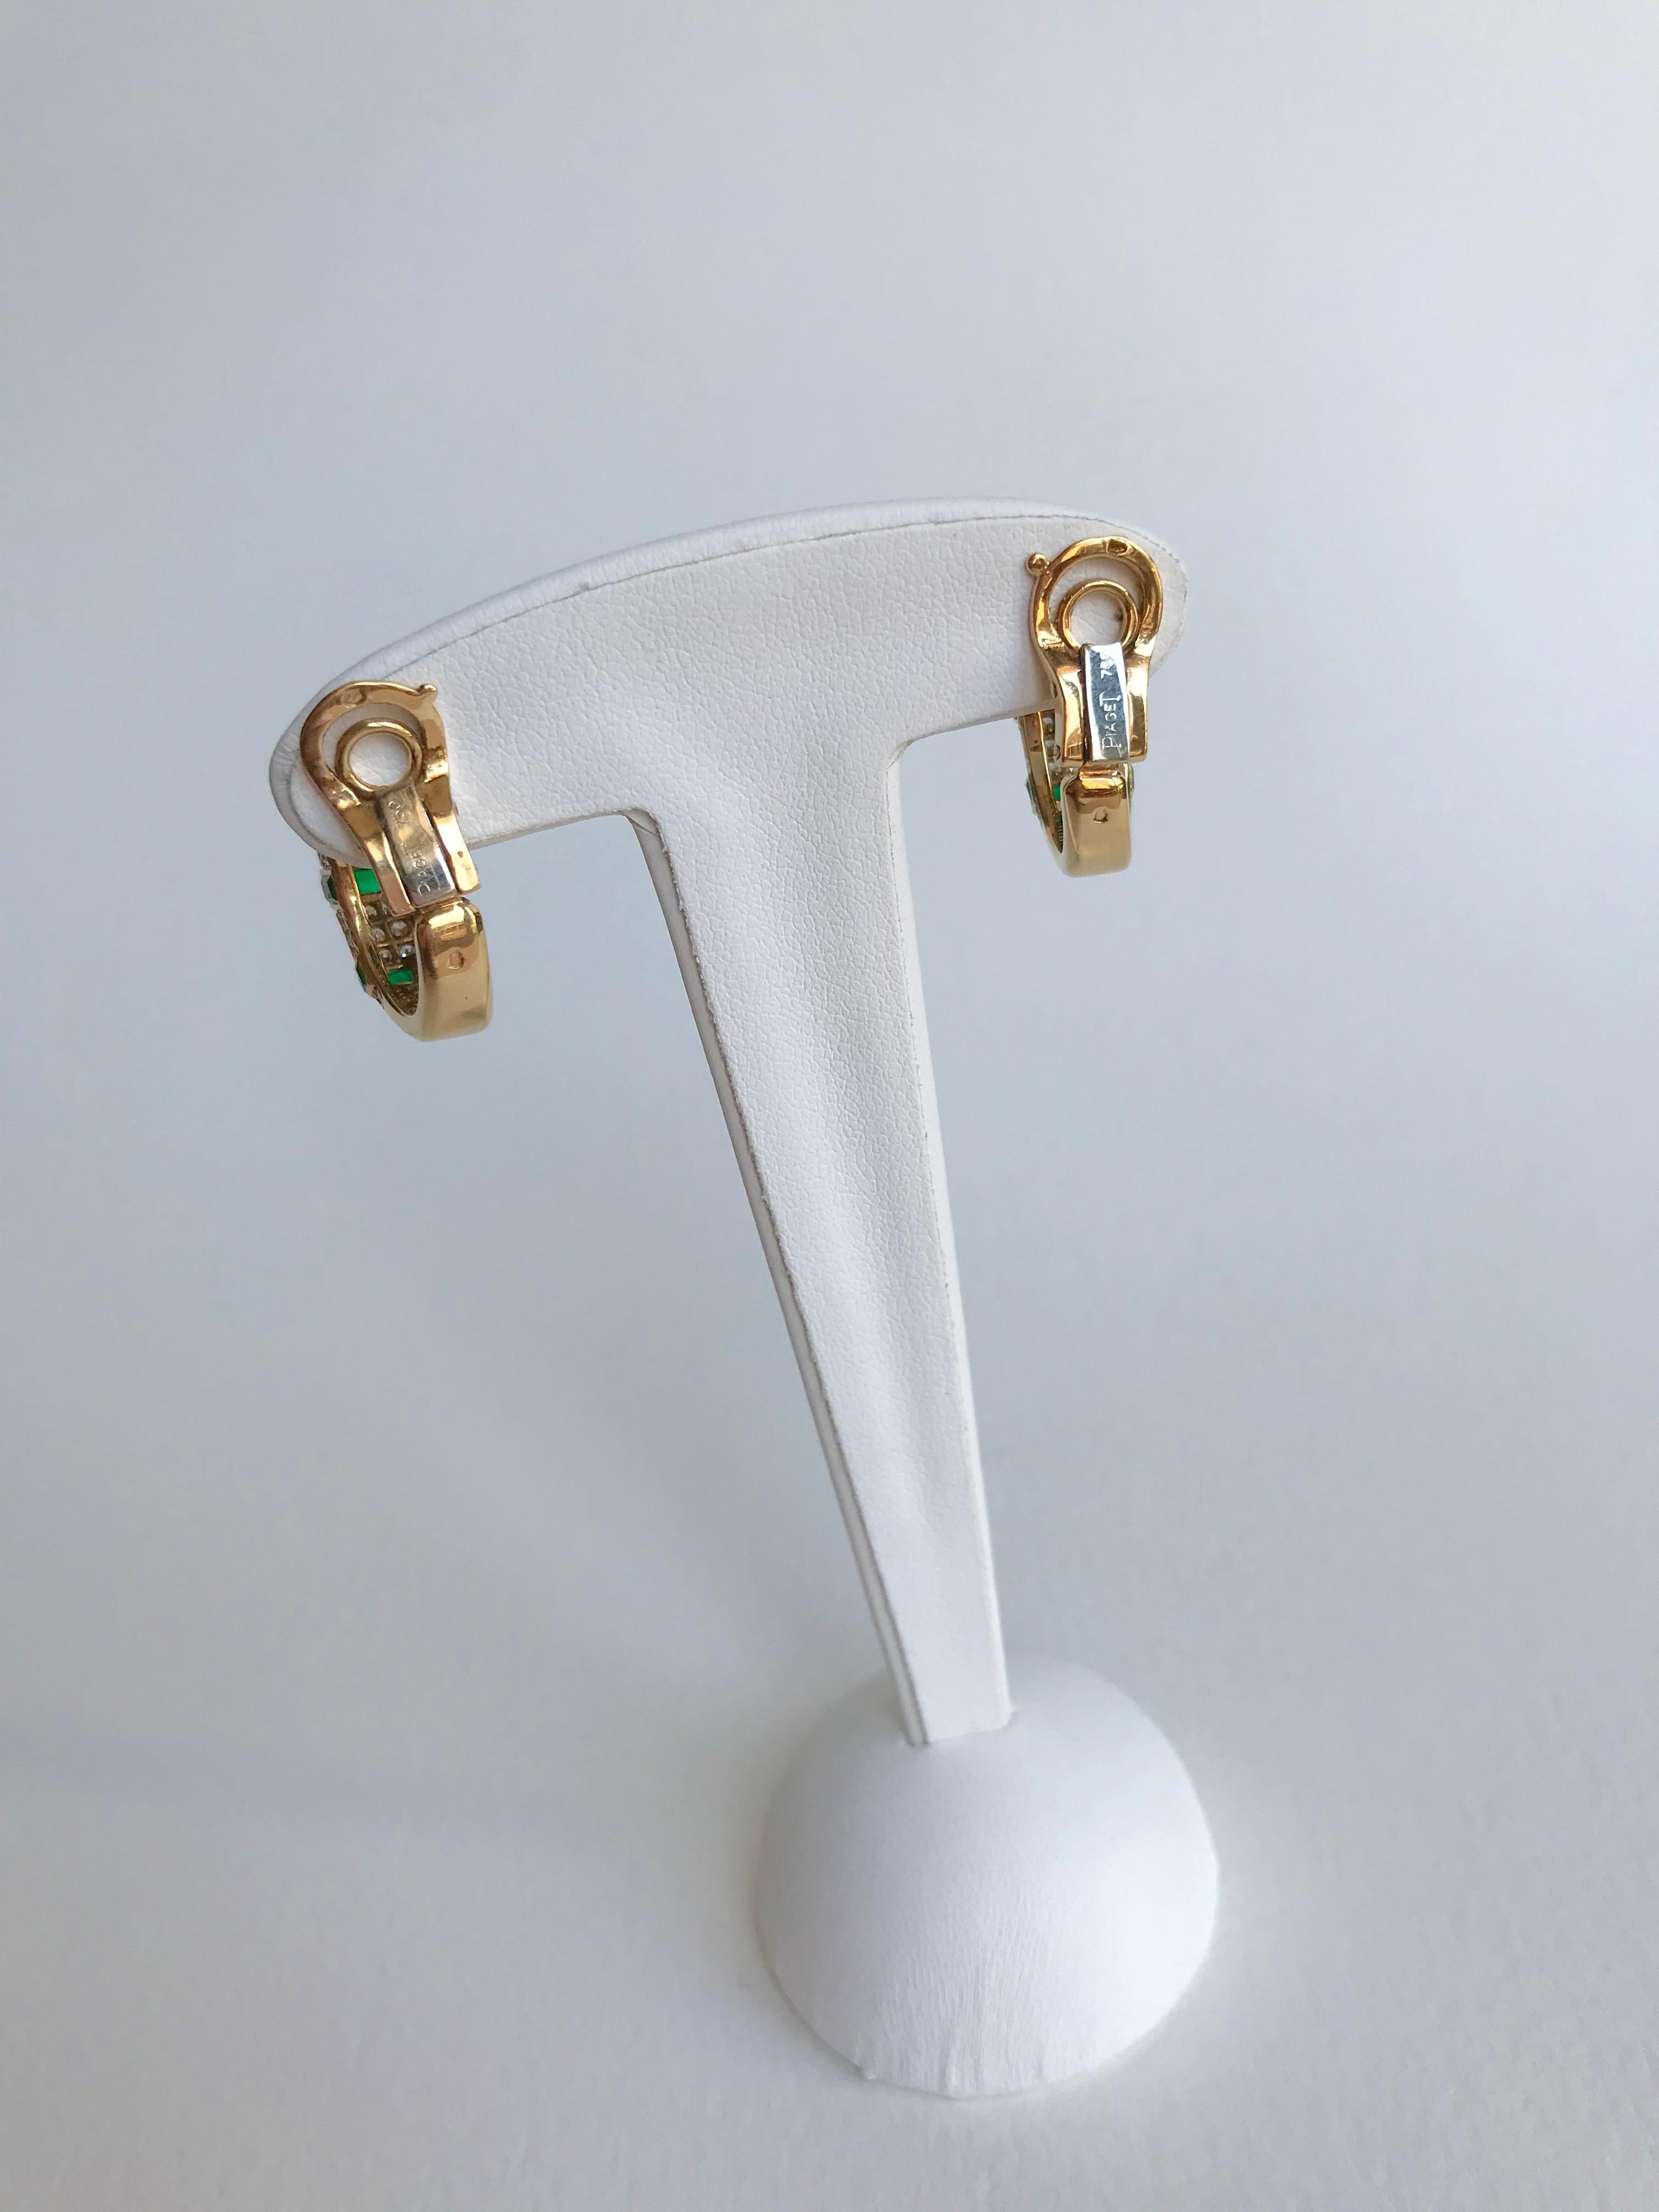 Emerald Cut Piaget 18 Carat Yellow Gold Diamonds and Emerald Earrings For Sale